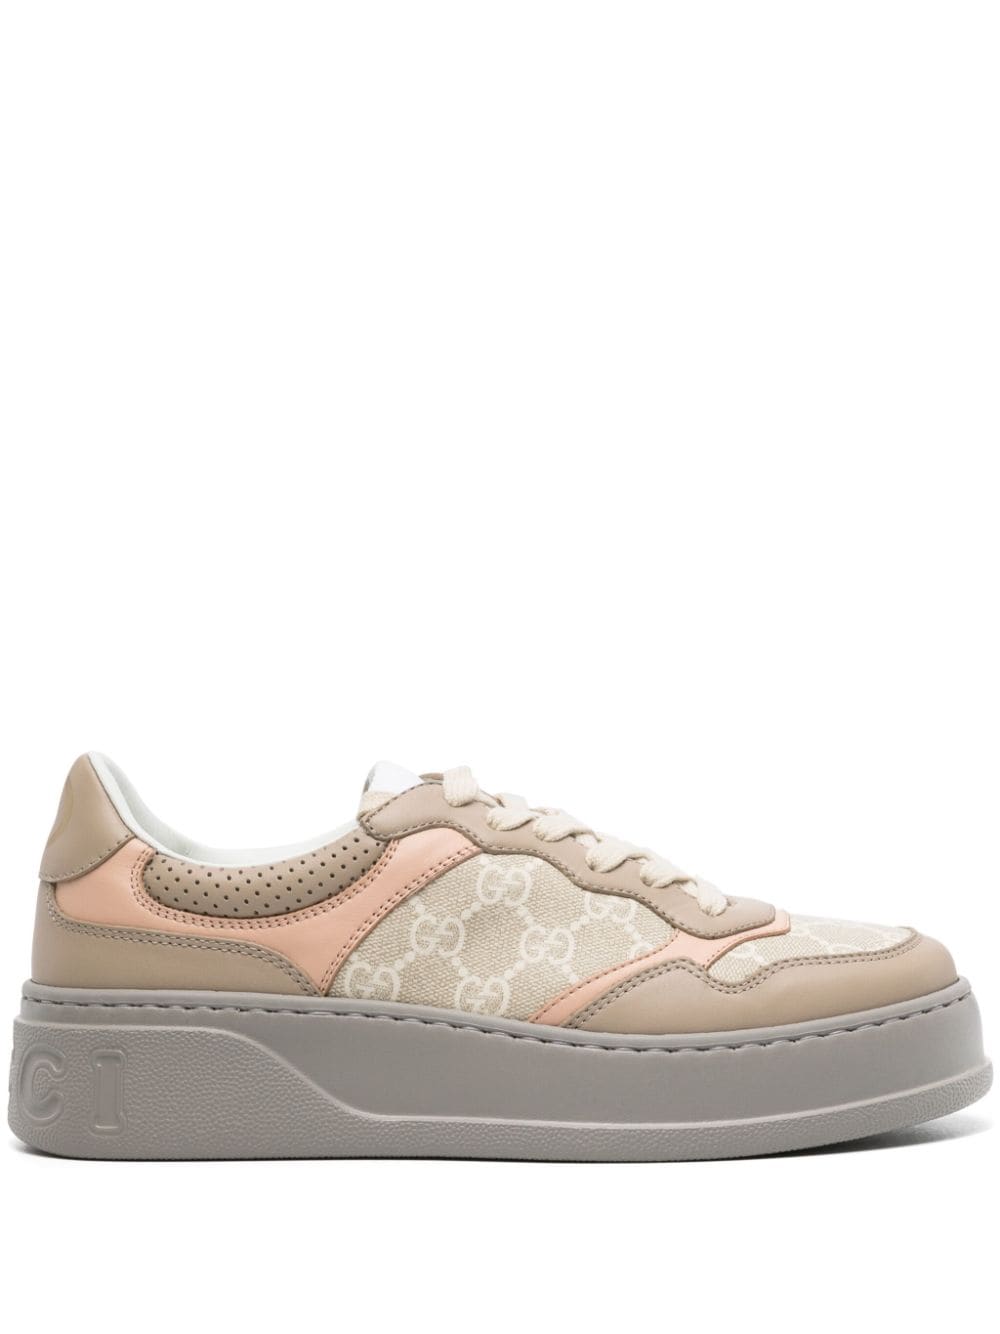 Gucci GG panelled low-top sneakers - Neutrals von Gucci